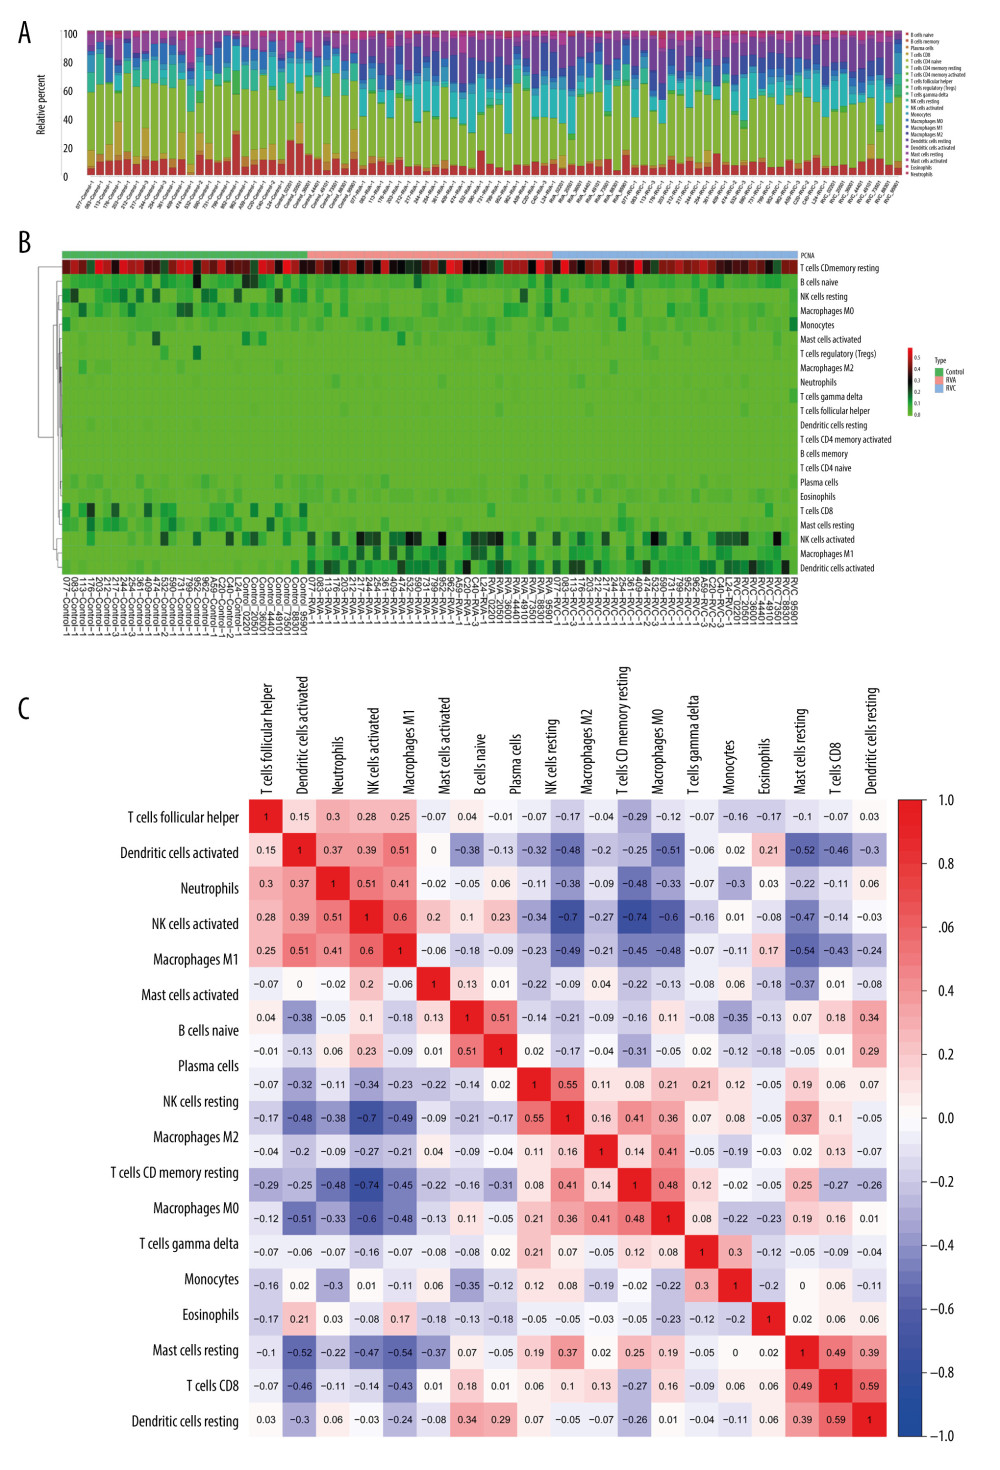 Expression of 22 kinds of immune cells in the 90 samples. (A) The content of 22 kinds of immune cells; (B) The heatmap of 22 kinds of immune cells proportional; (C) Correlation between different immune cells.